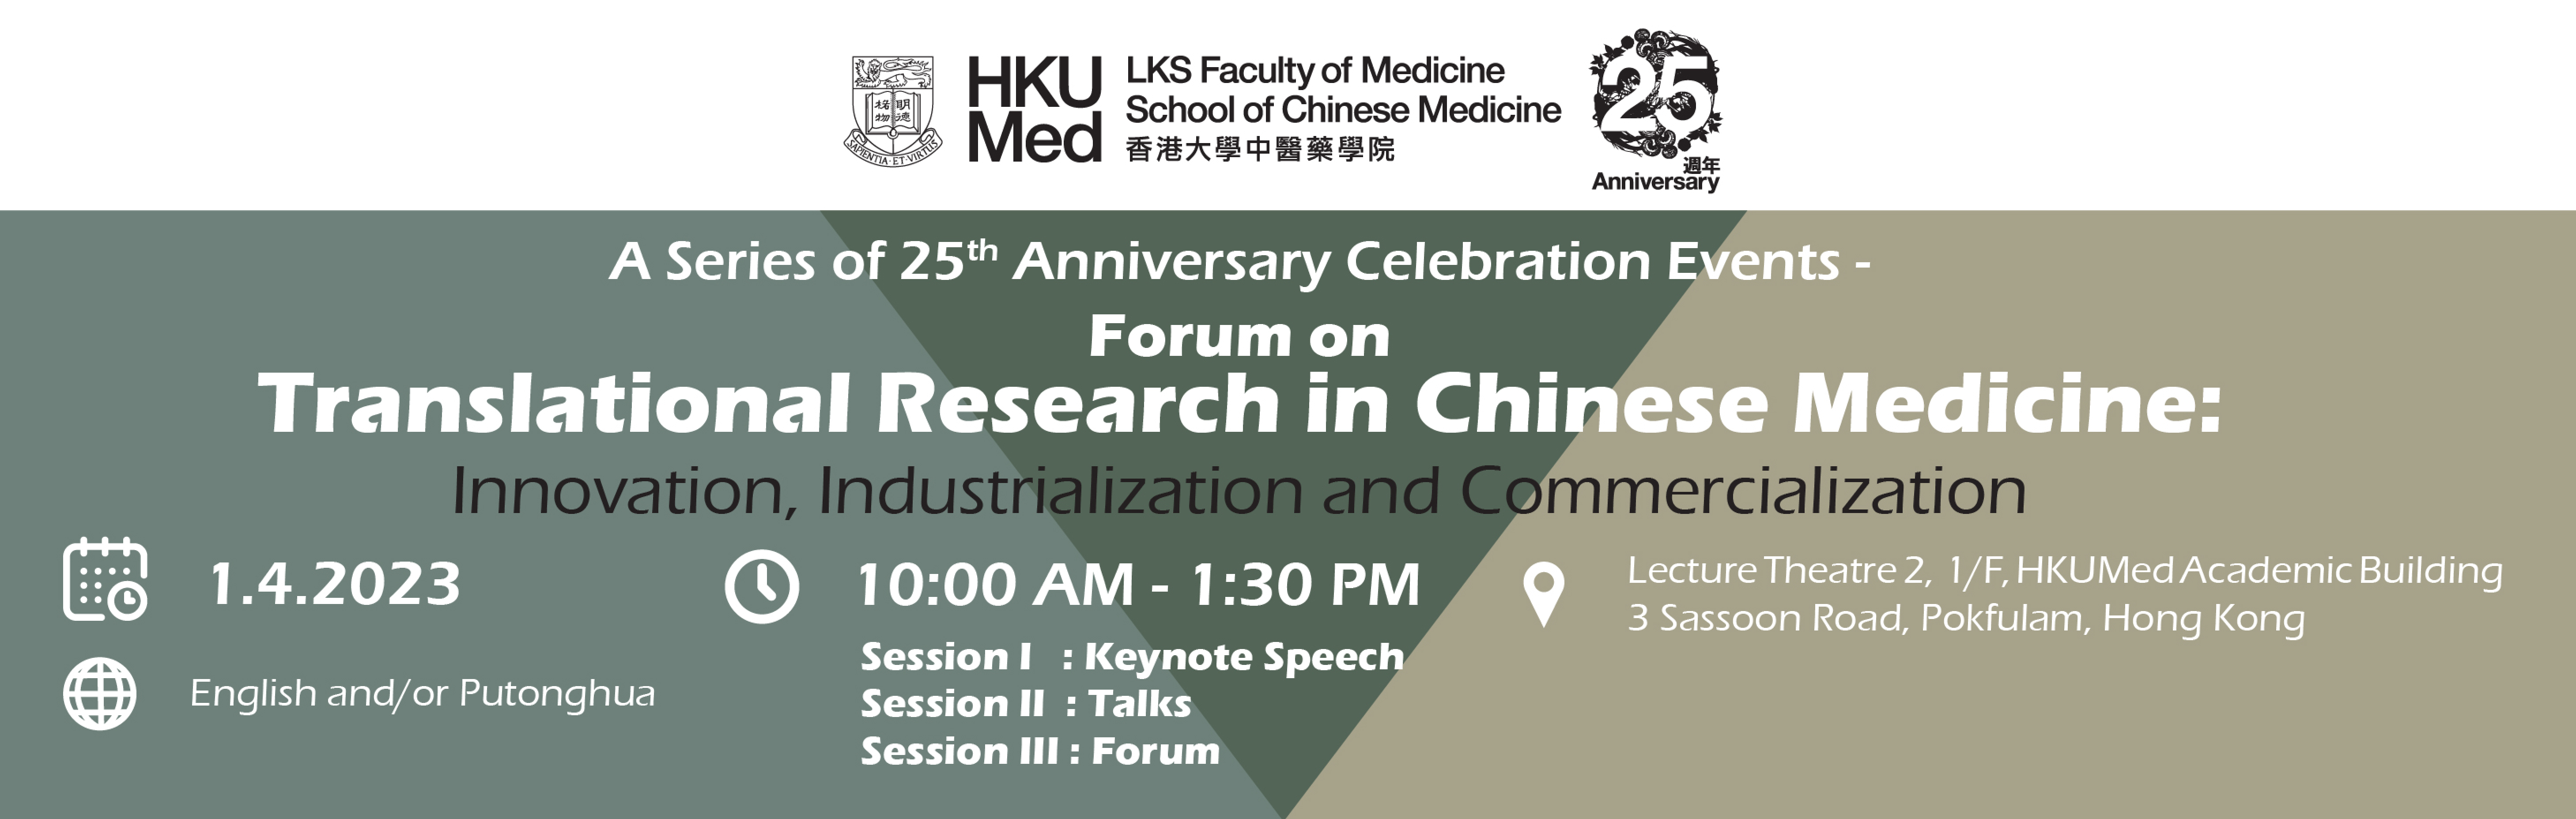 Forum on Translational Research in Chinese Medicine: Innovation, Industrialization and Commercialization chi